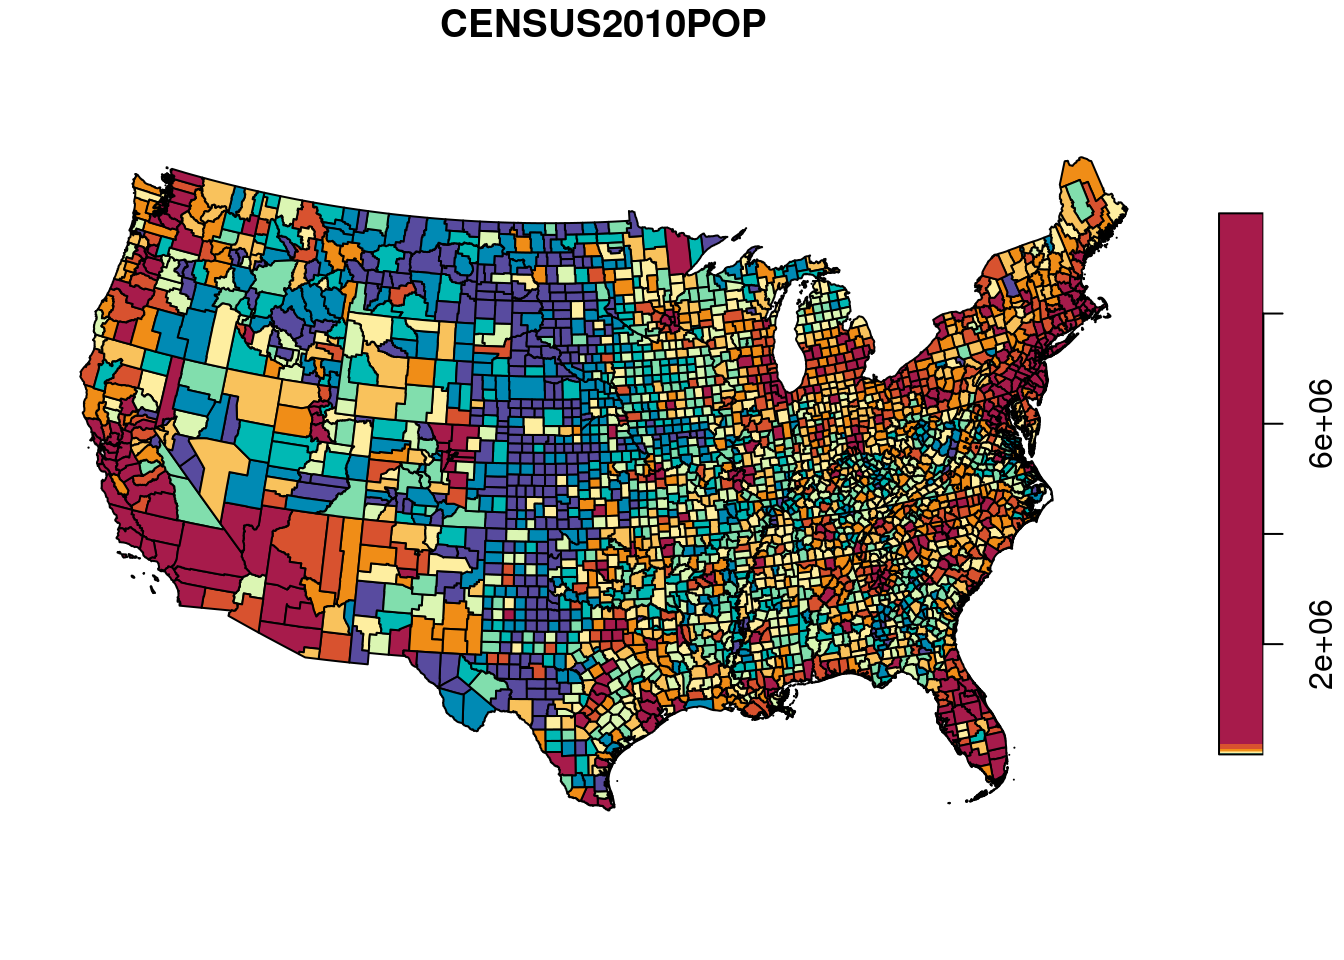 Population size per county in the US (quantile breaks)